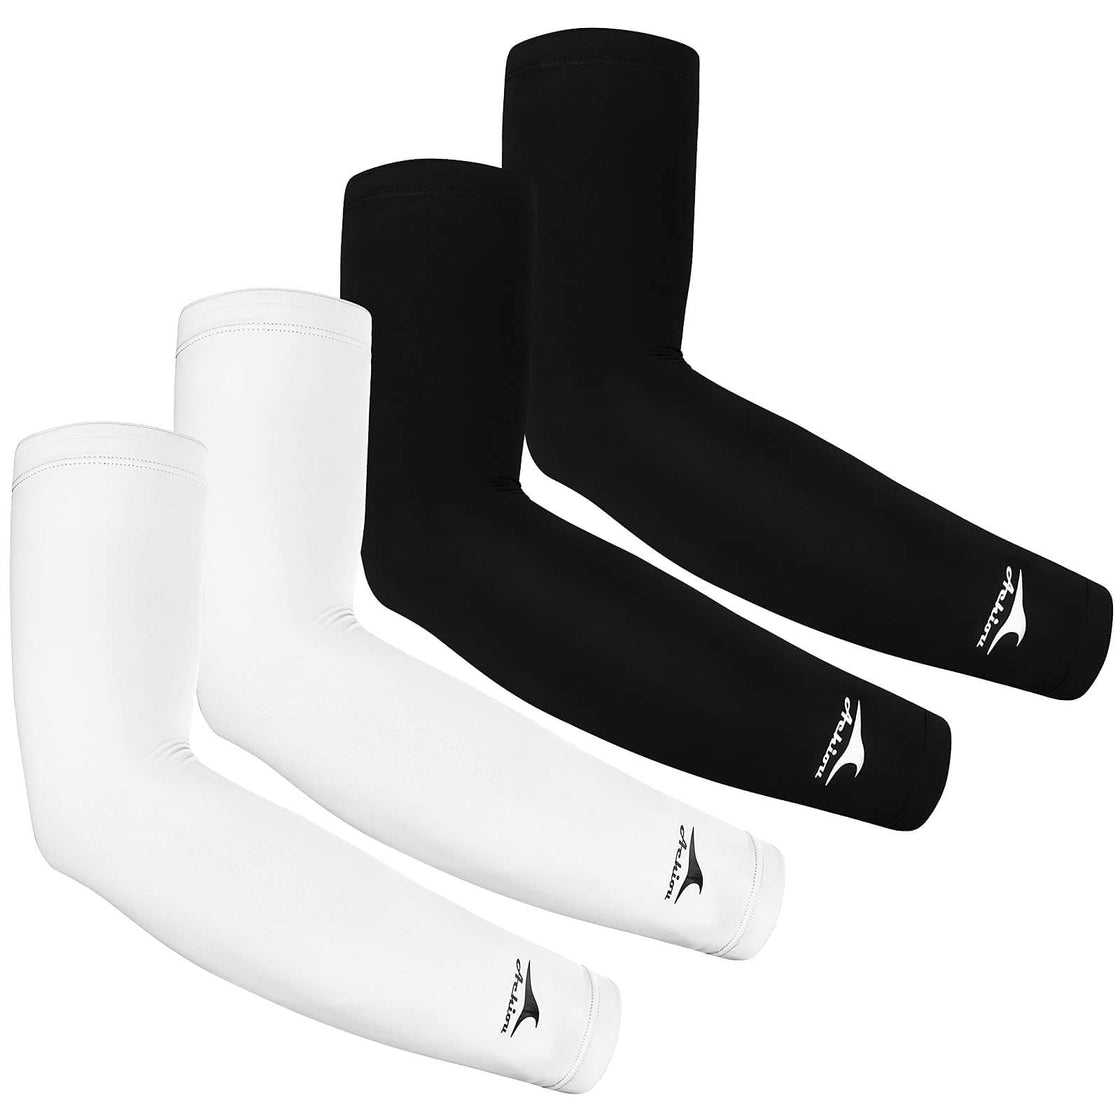 Cooling Arm Sleeves - Achiou